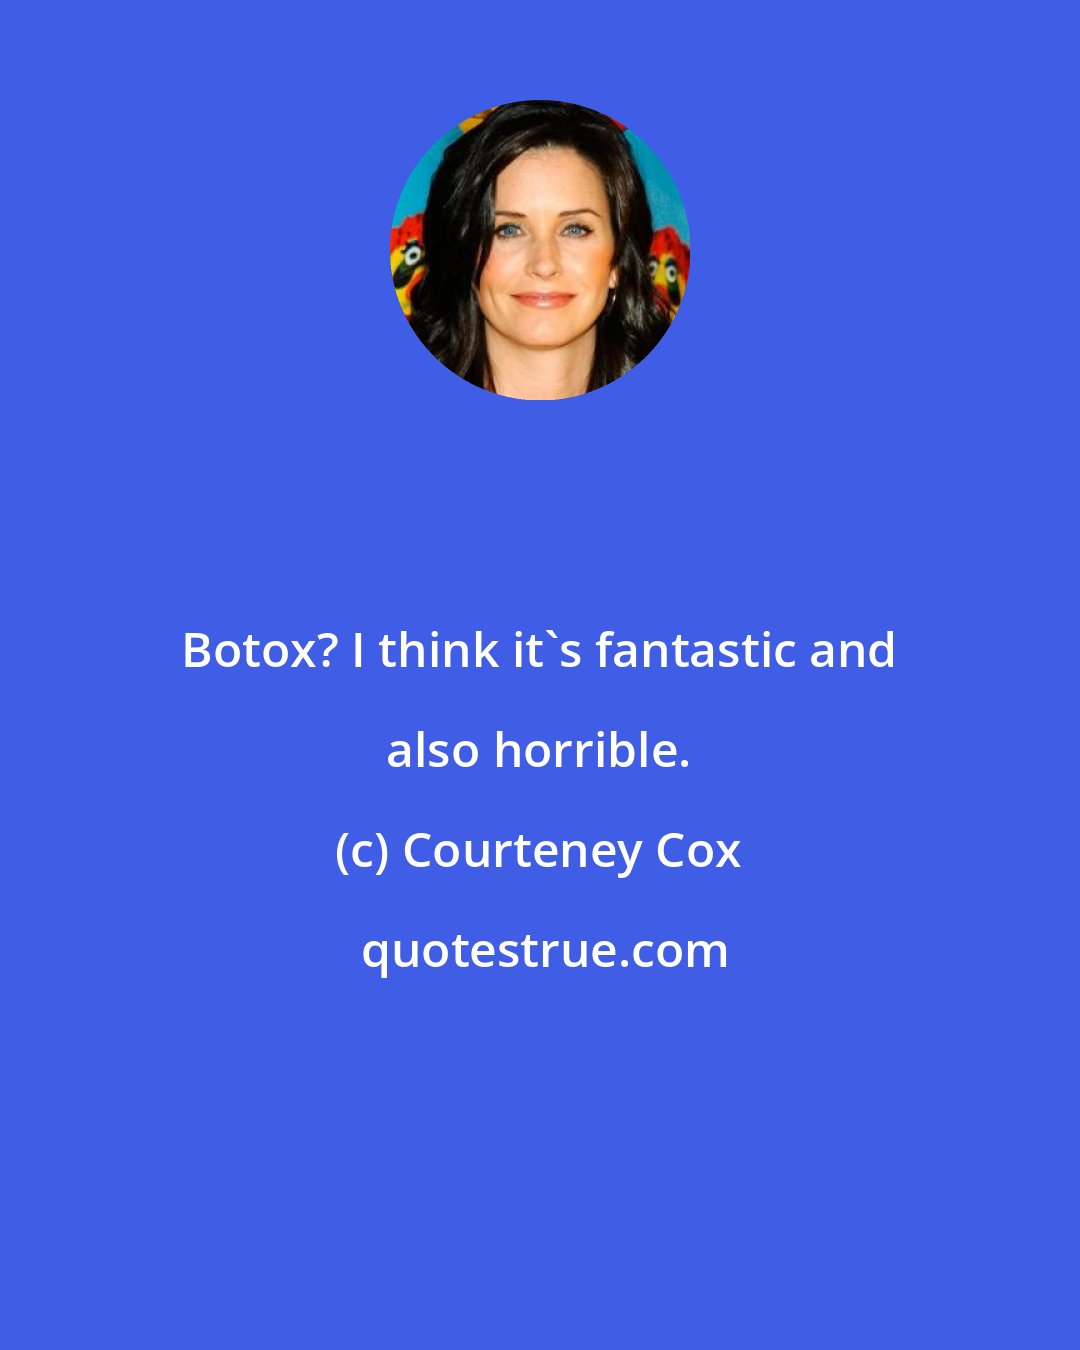 Courteney Cox: Botox? I think it's fantastic and also horrible.